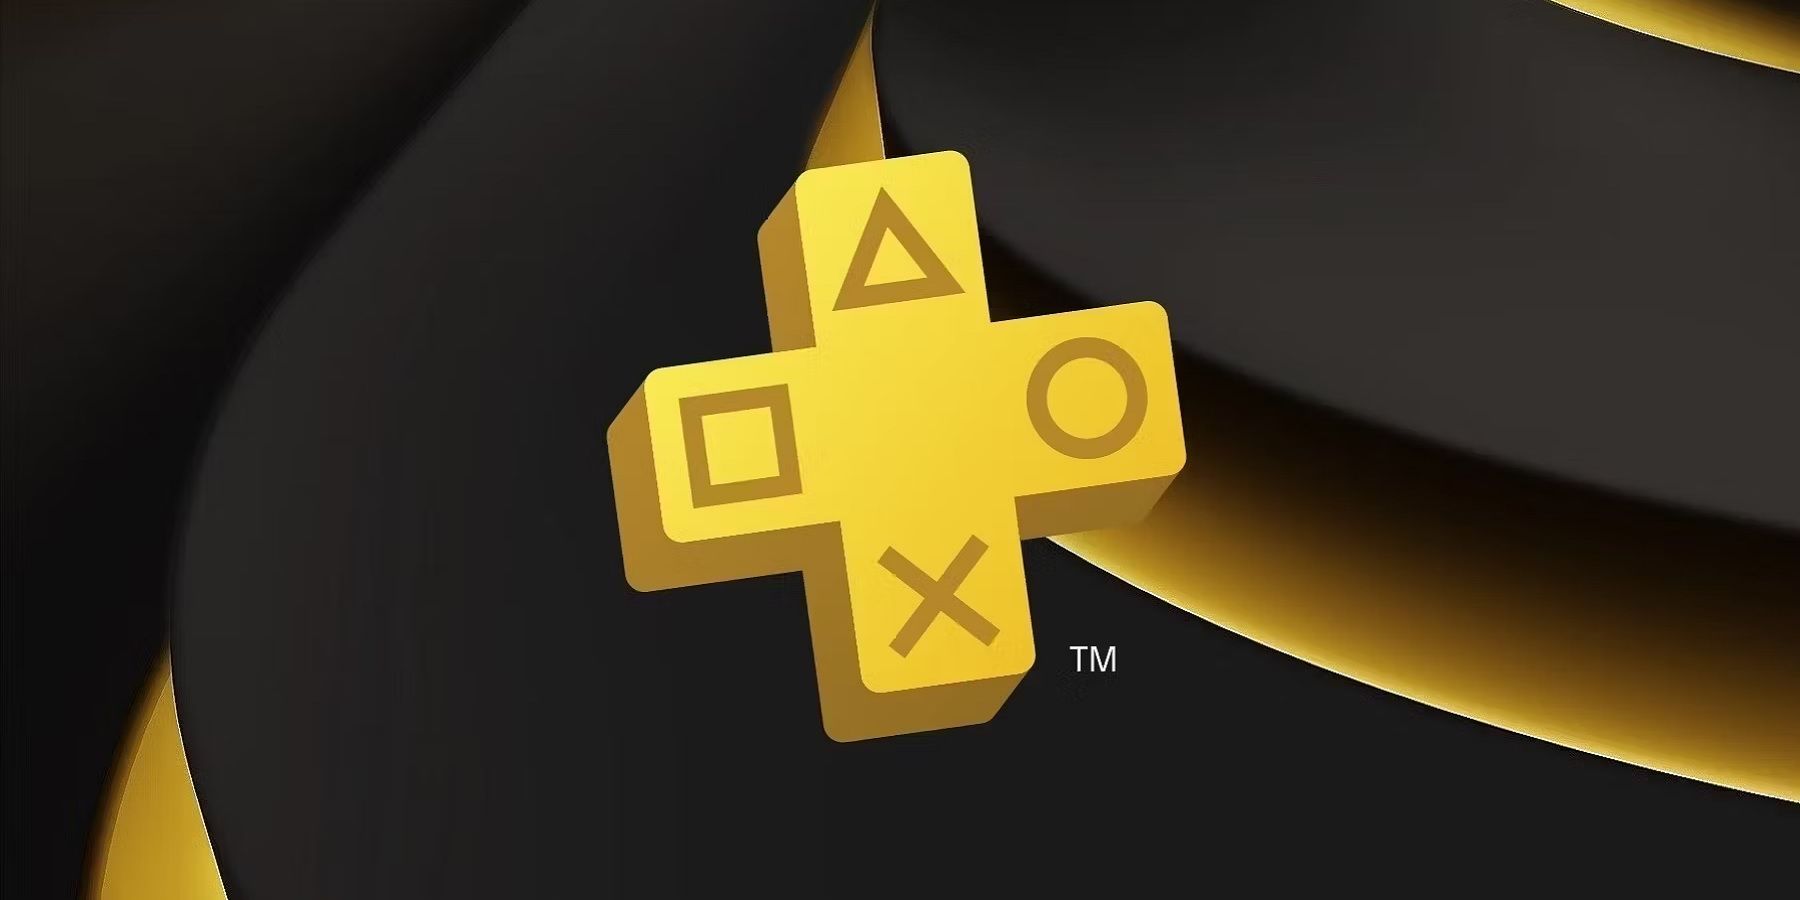 PS Plus Extra and Premium Games for October 2023 Revealed